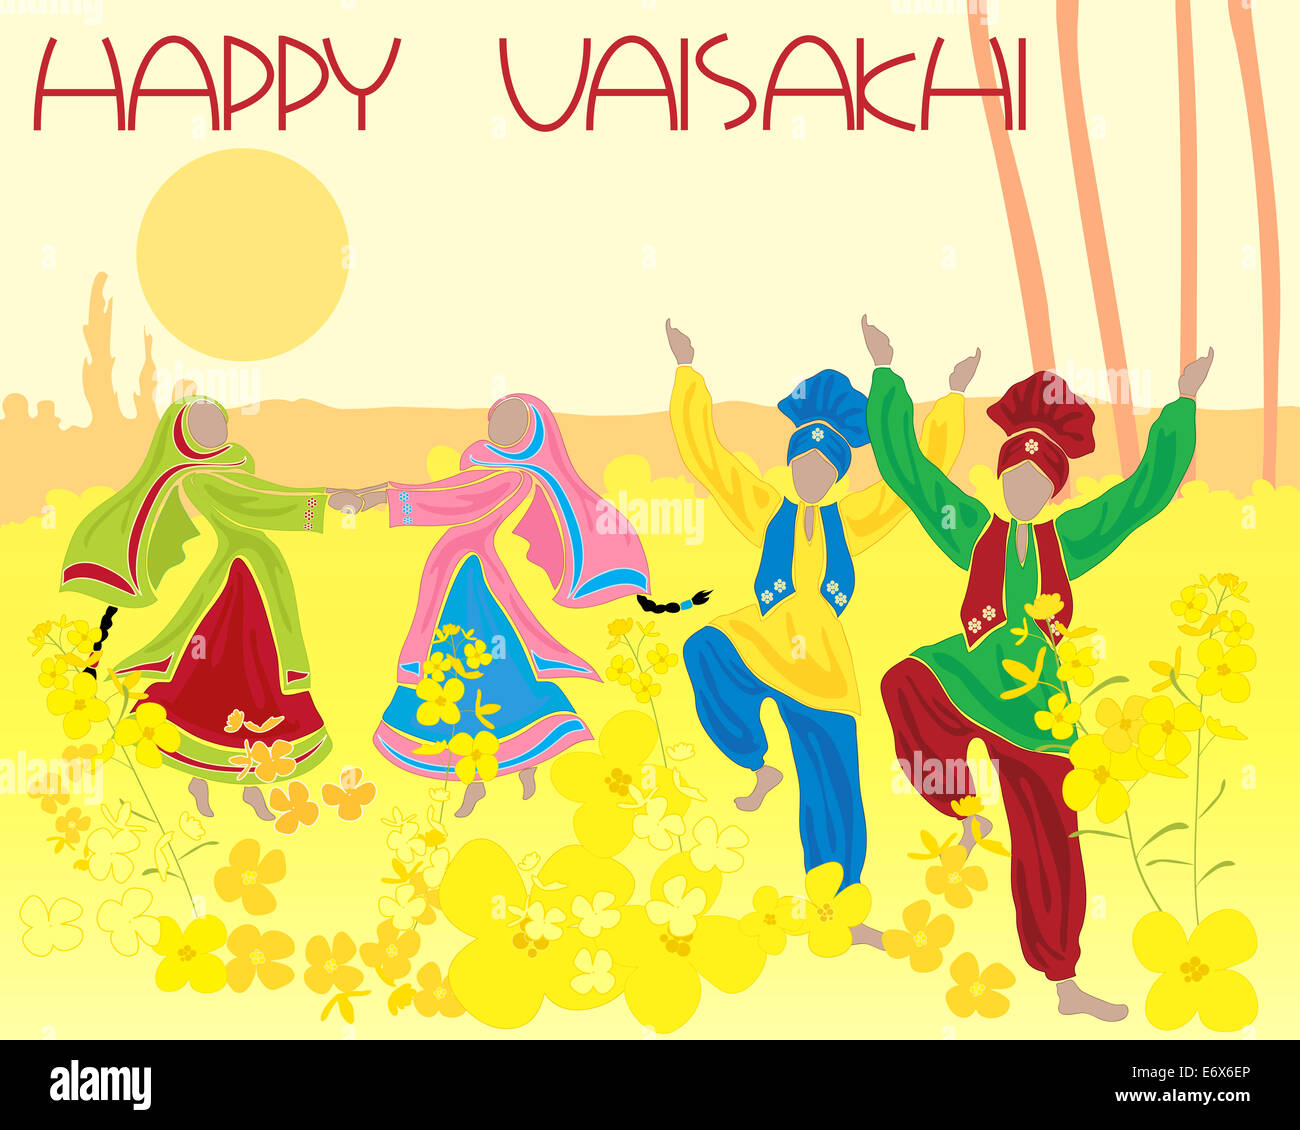 an illustration of a folk dance amongst the mustard crops of rural Punjab with the greeting happy Vaisakhi Stock Photo